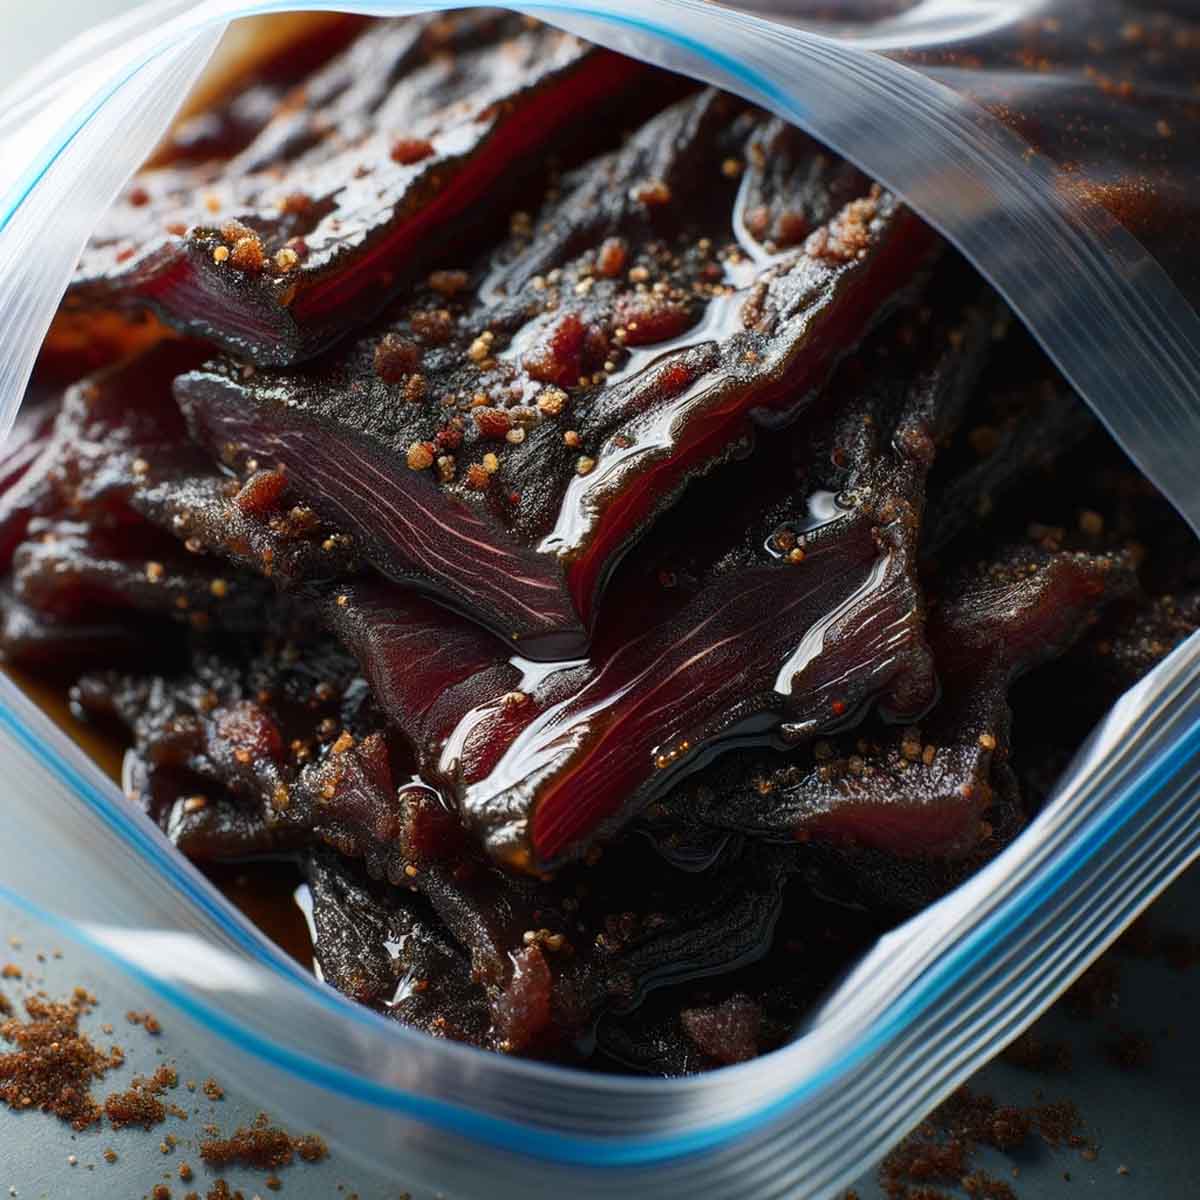 Close-up of beef jerky strips in a ziplock bag, mid-marination, coated in a dark, spice-rich marinade.